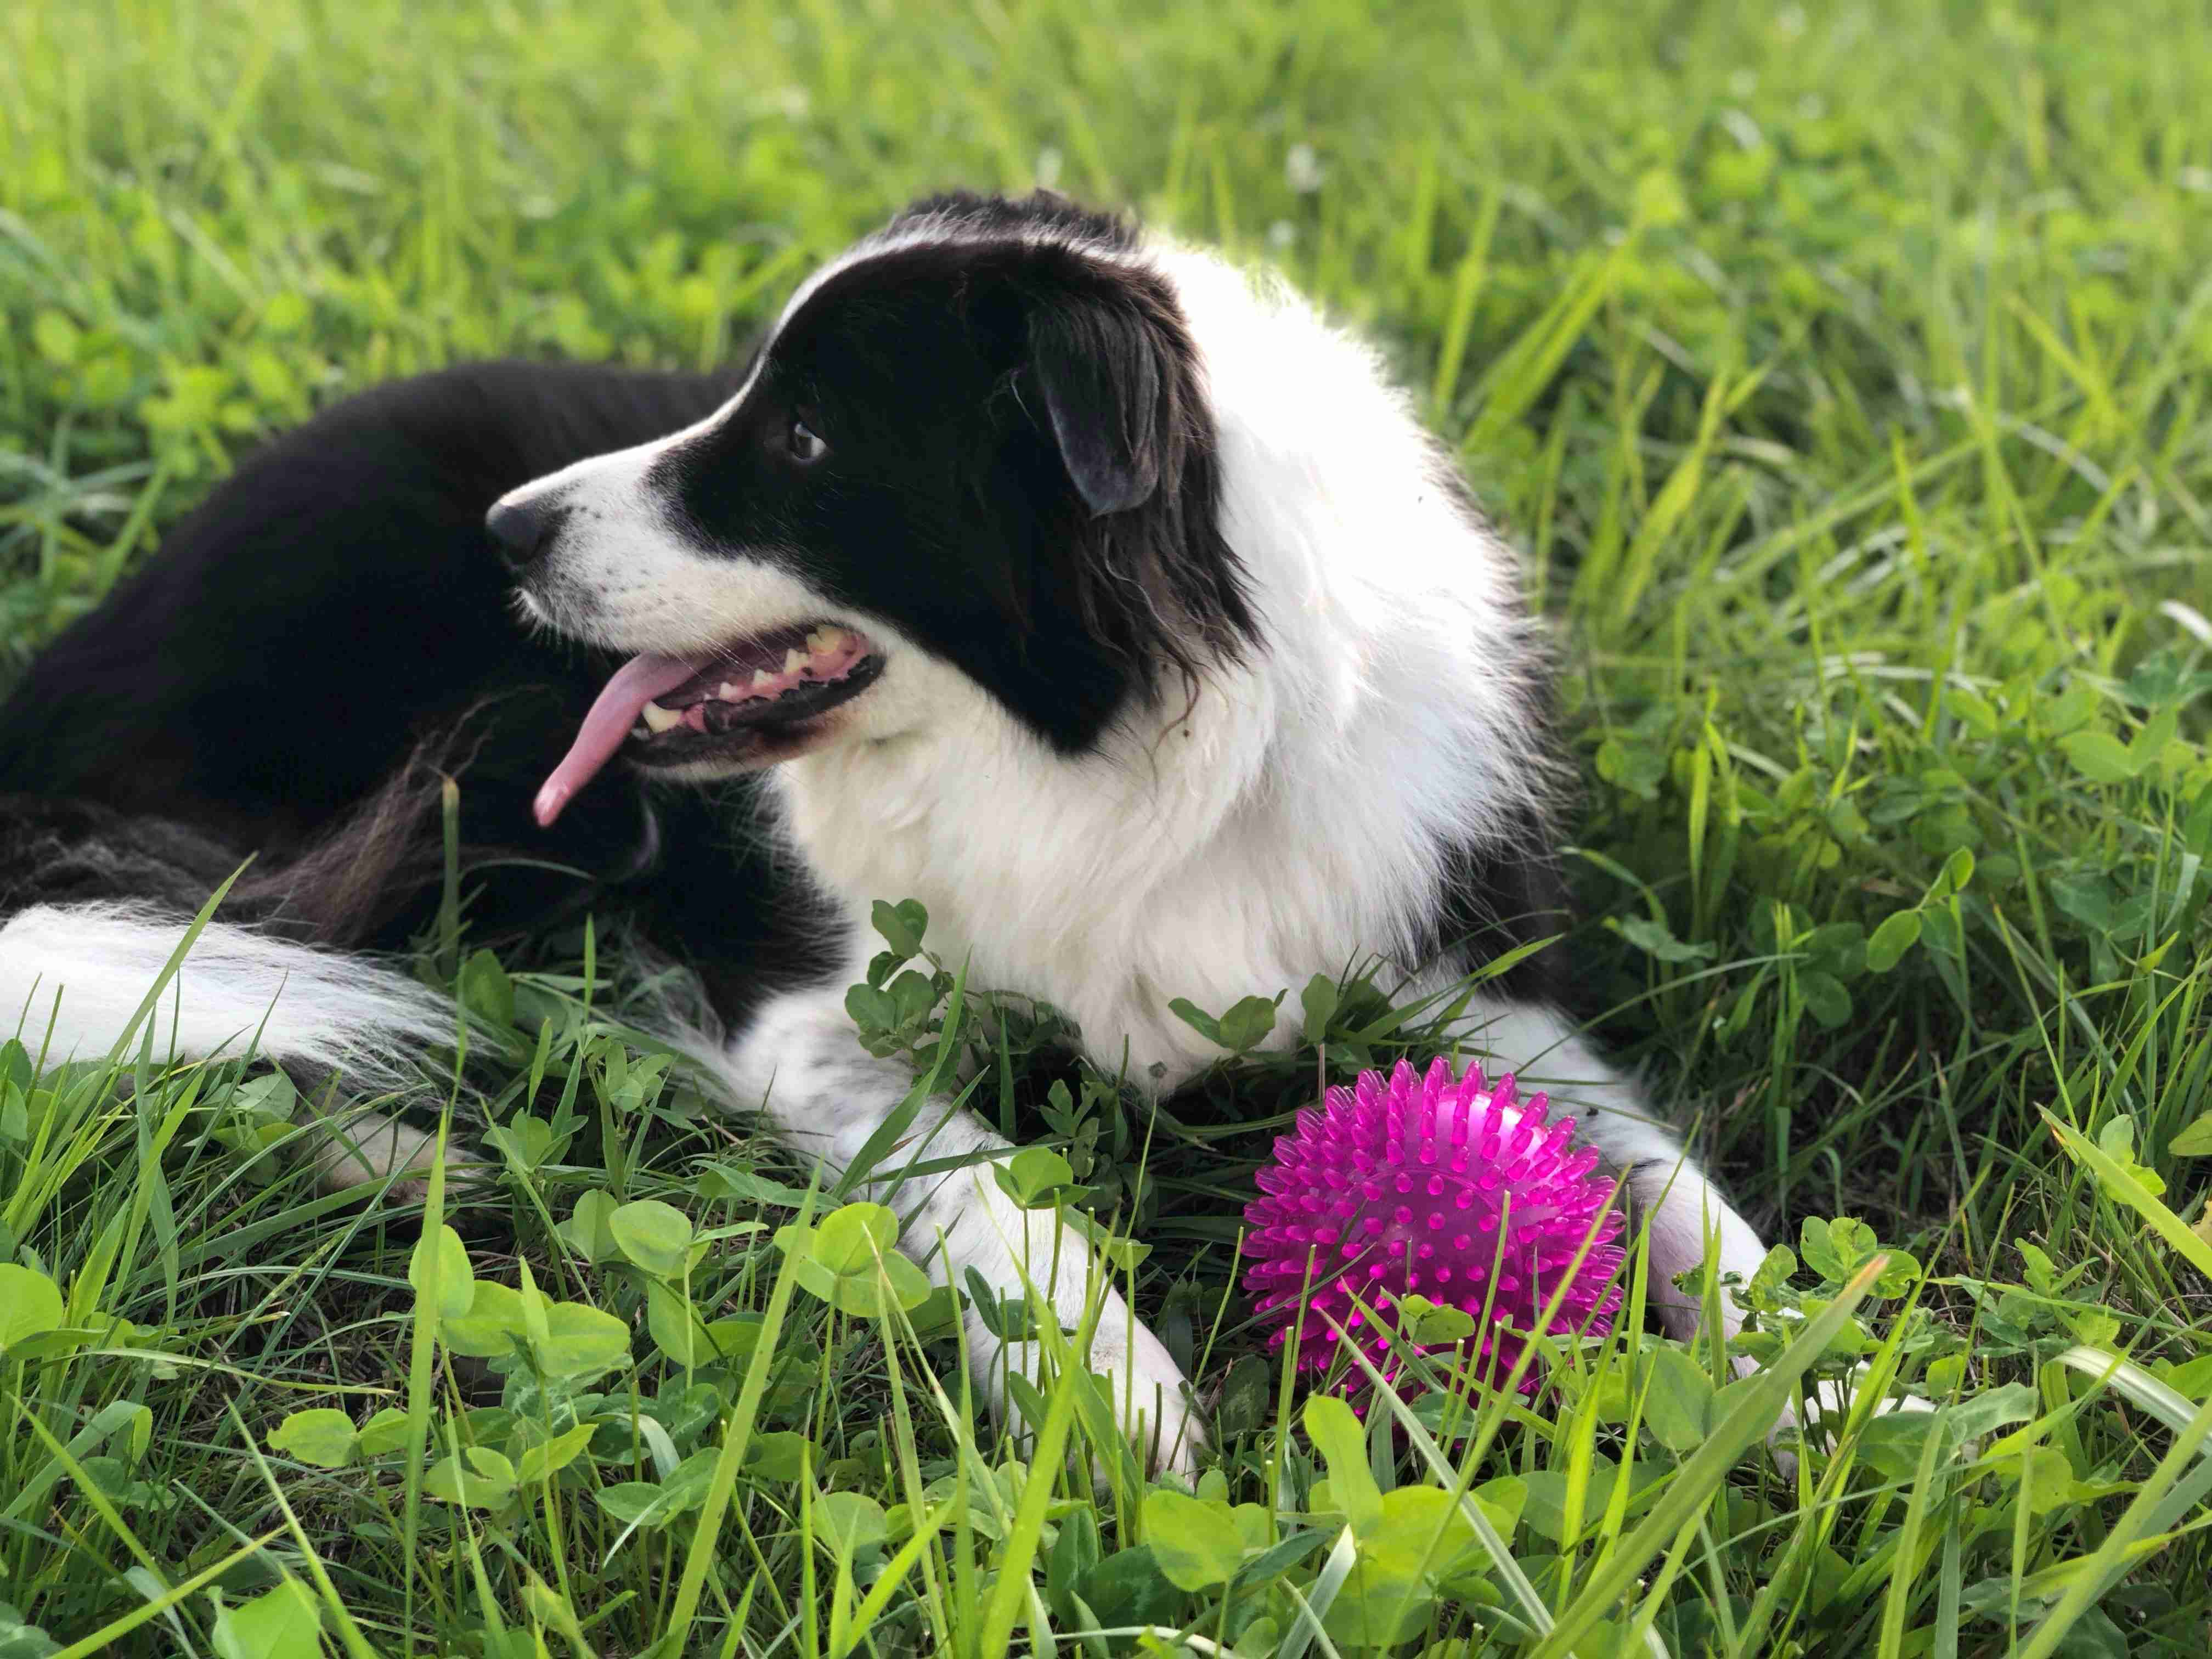 Border Collie Show-Quality Dogs: Pricing and Factors to Consider